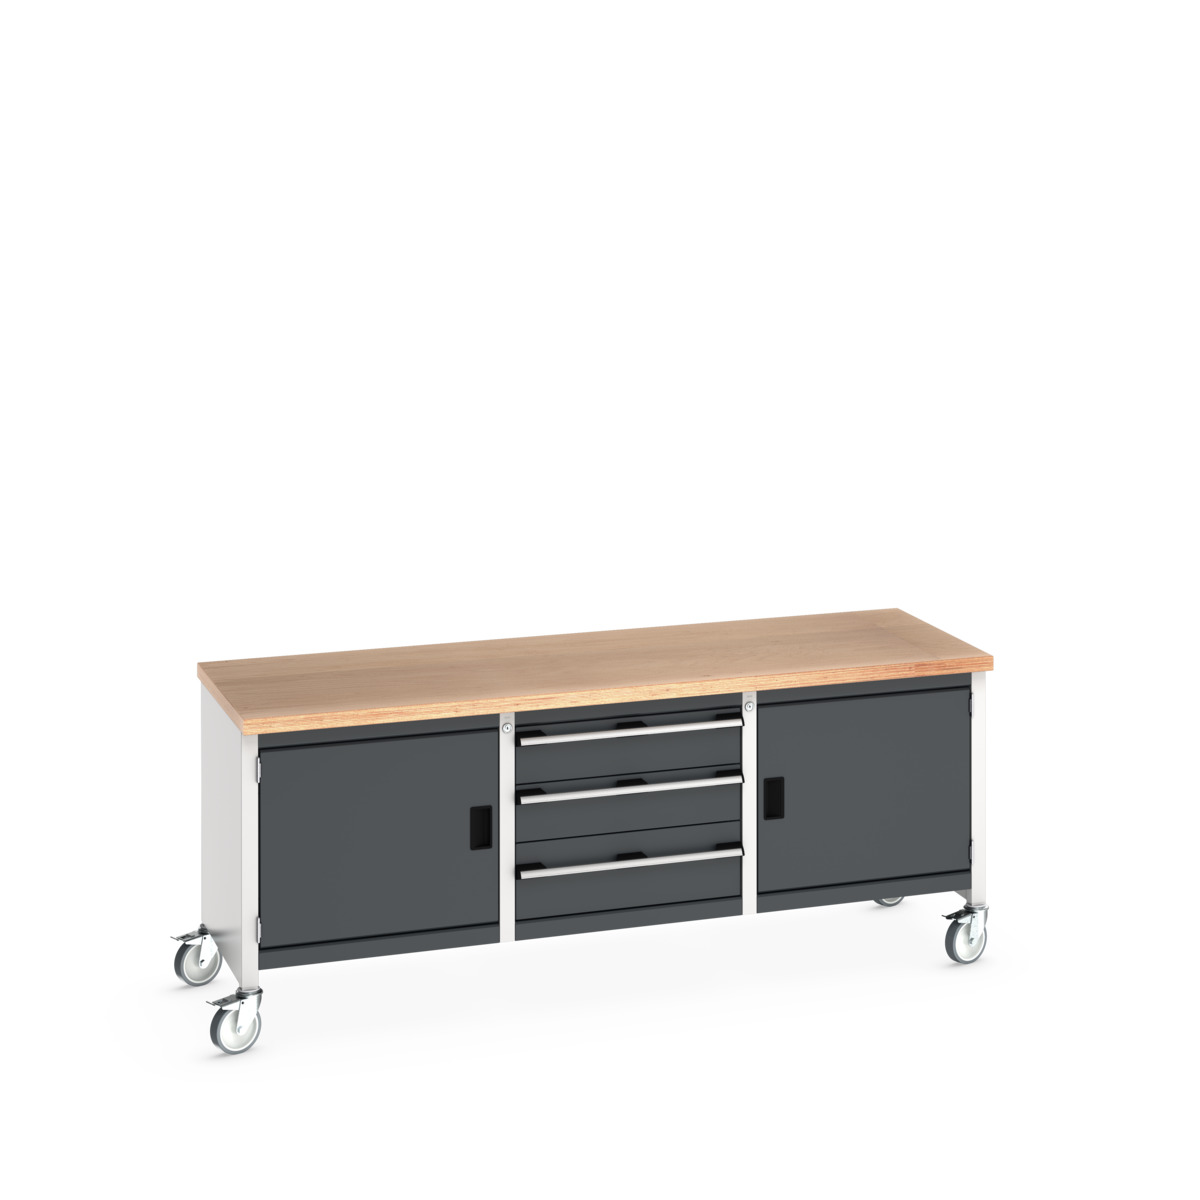 41002124.19V - cubio mobile storage bench (mpx)